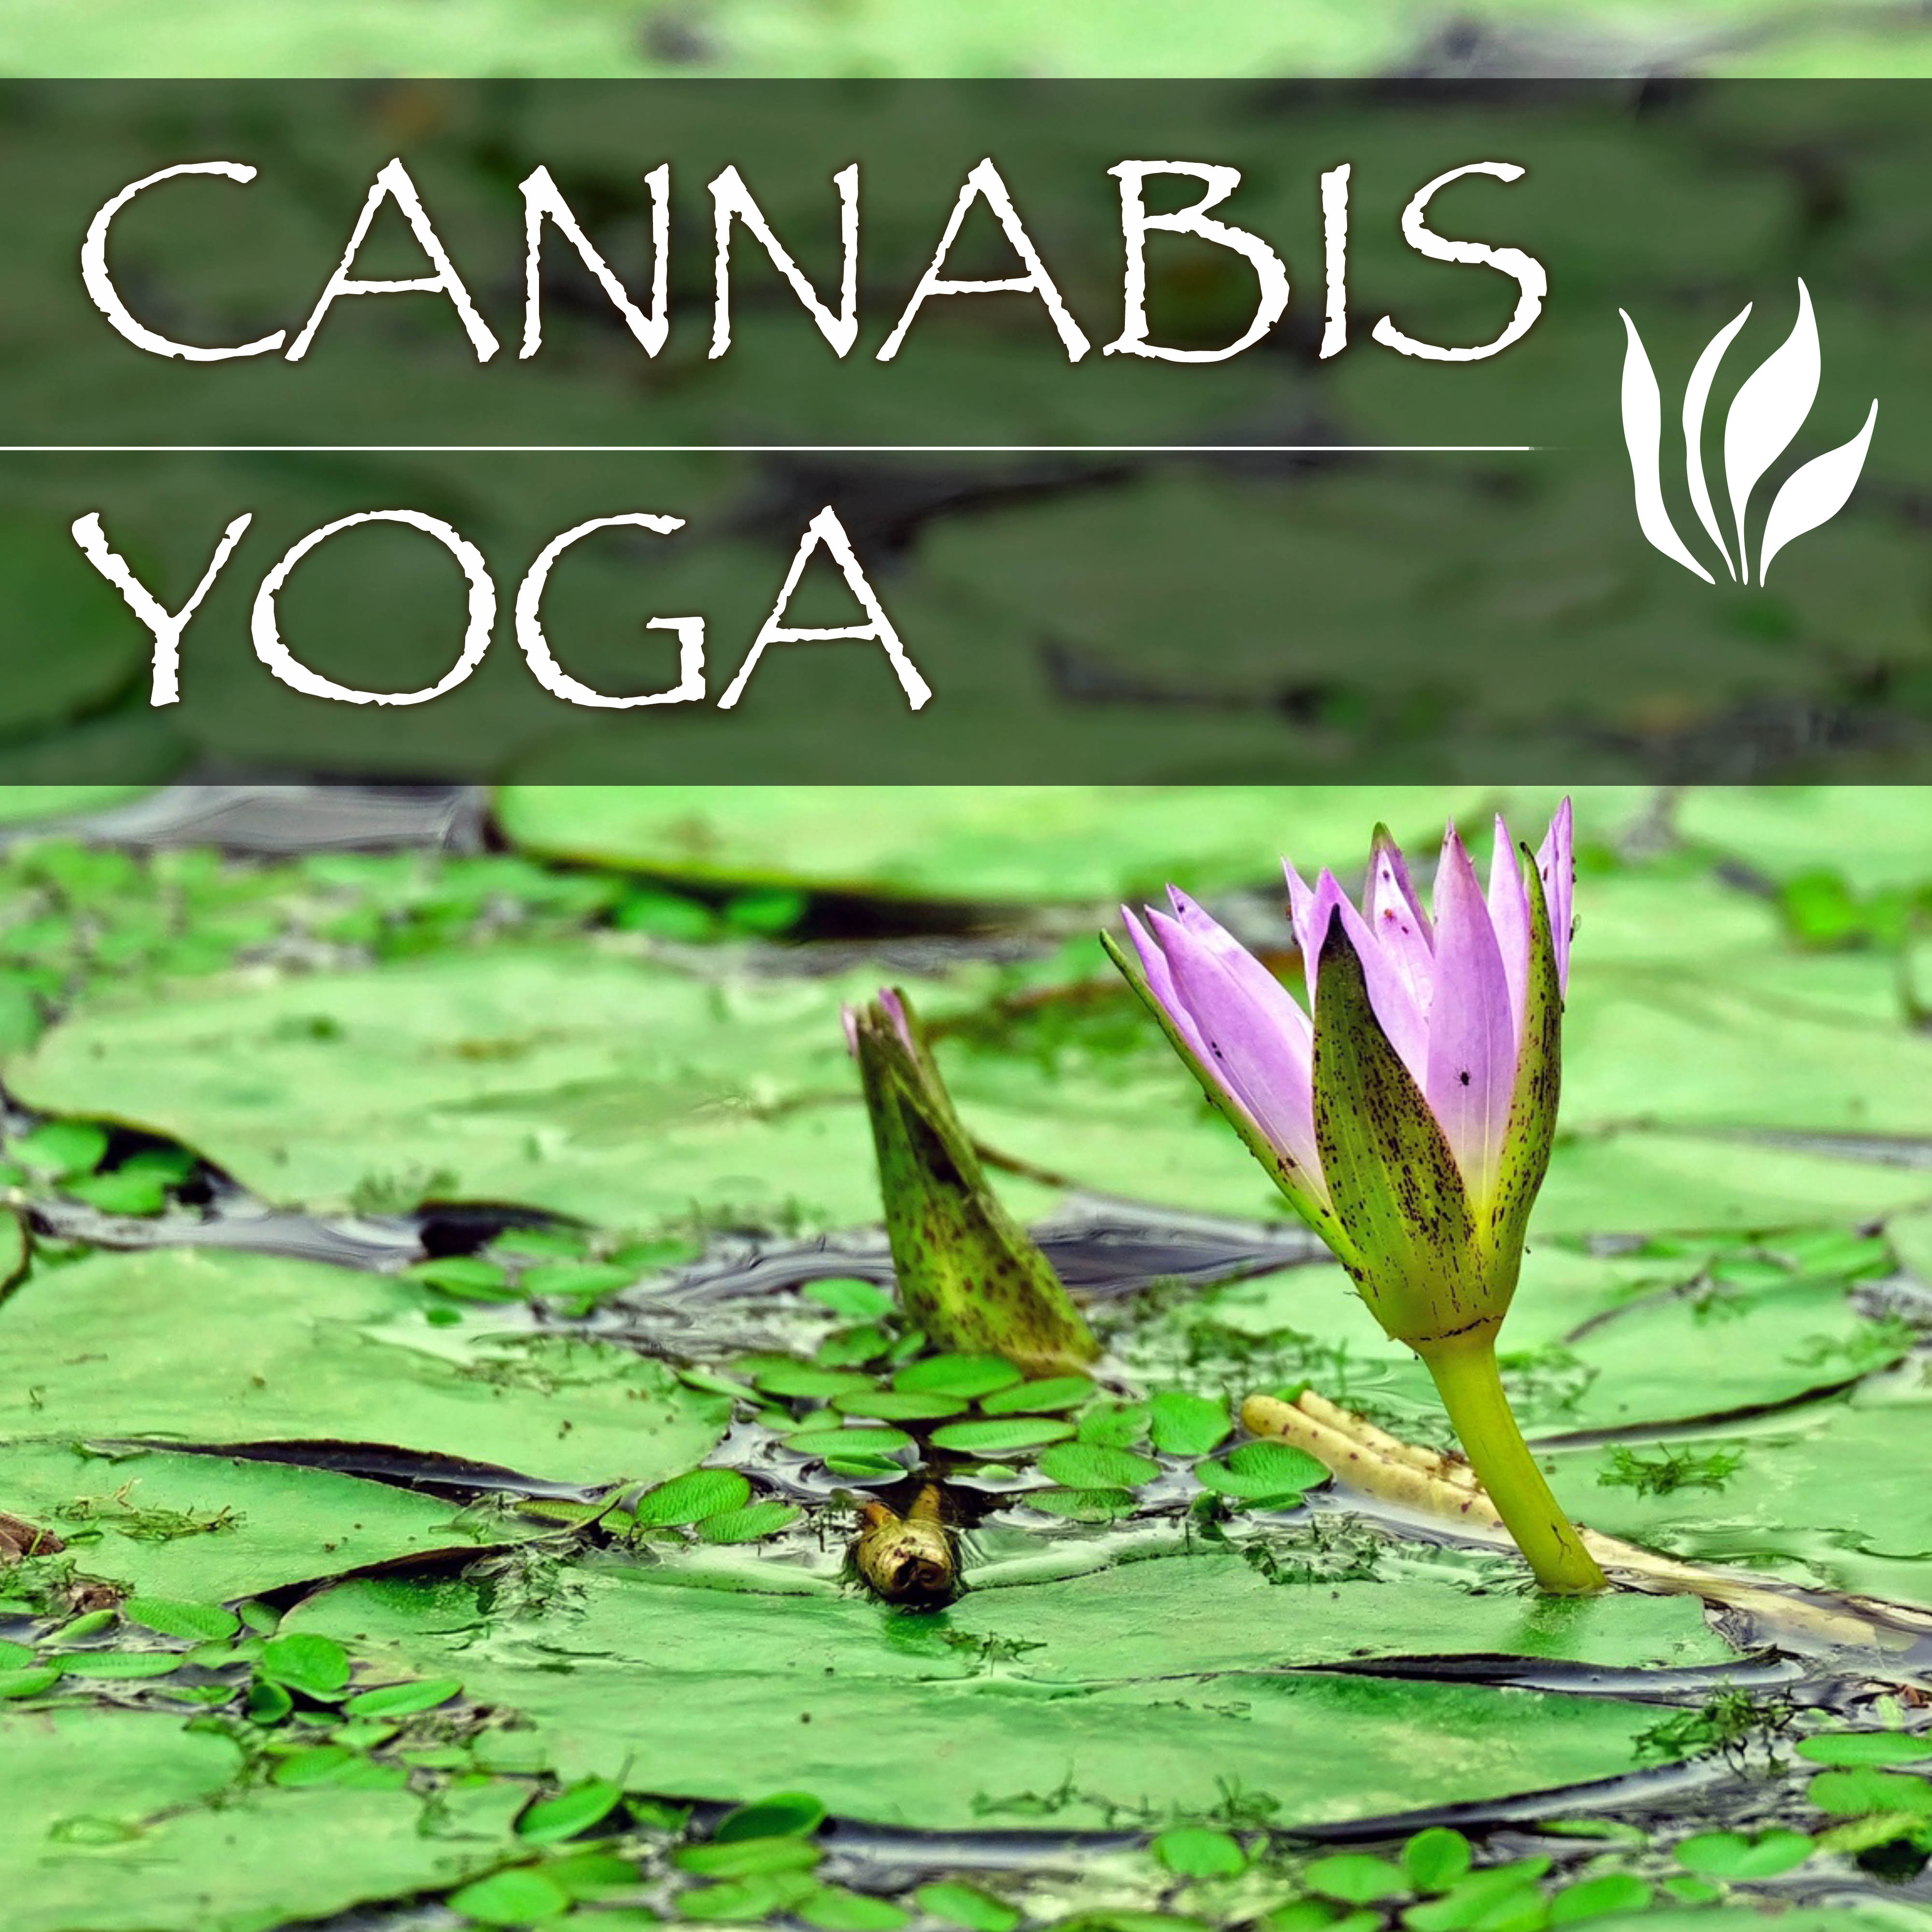 Cannabis Yoga - Hippie Songs for Yoga Classes, Best Trance Music for Meditation